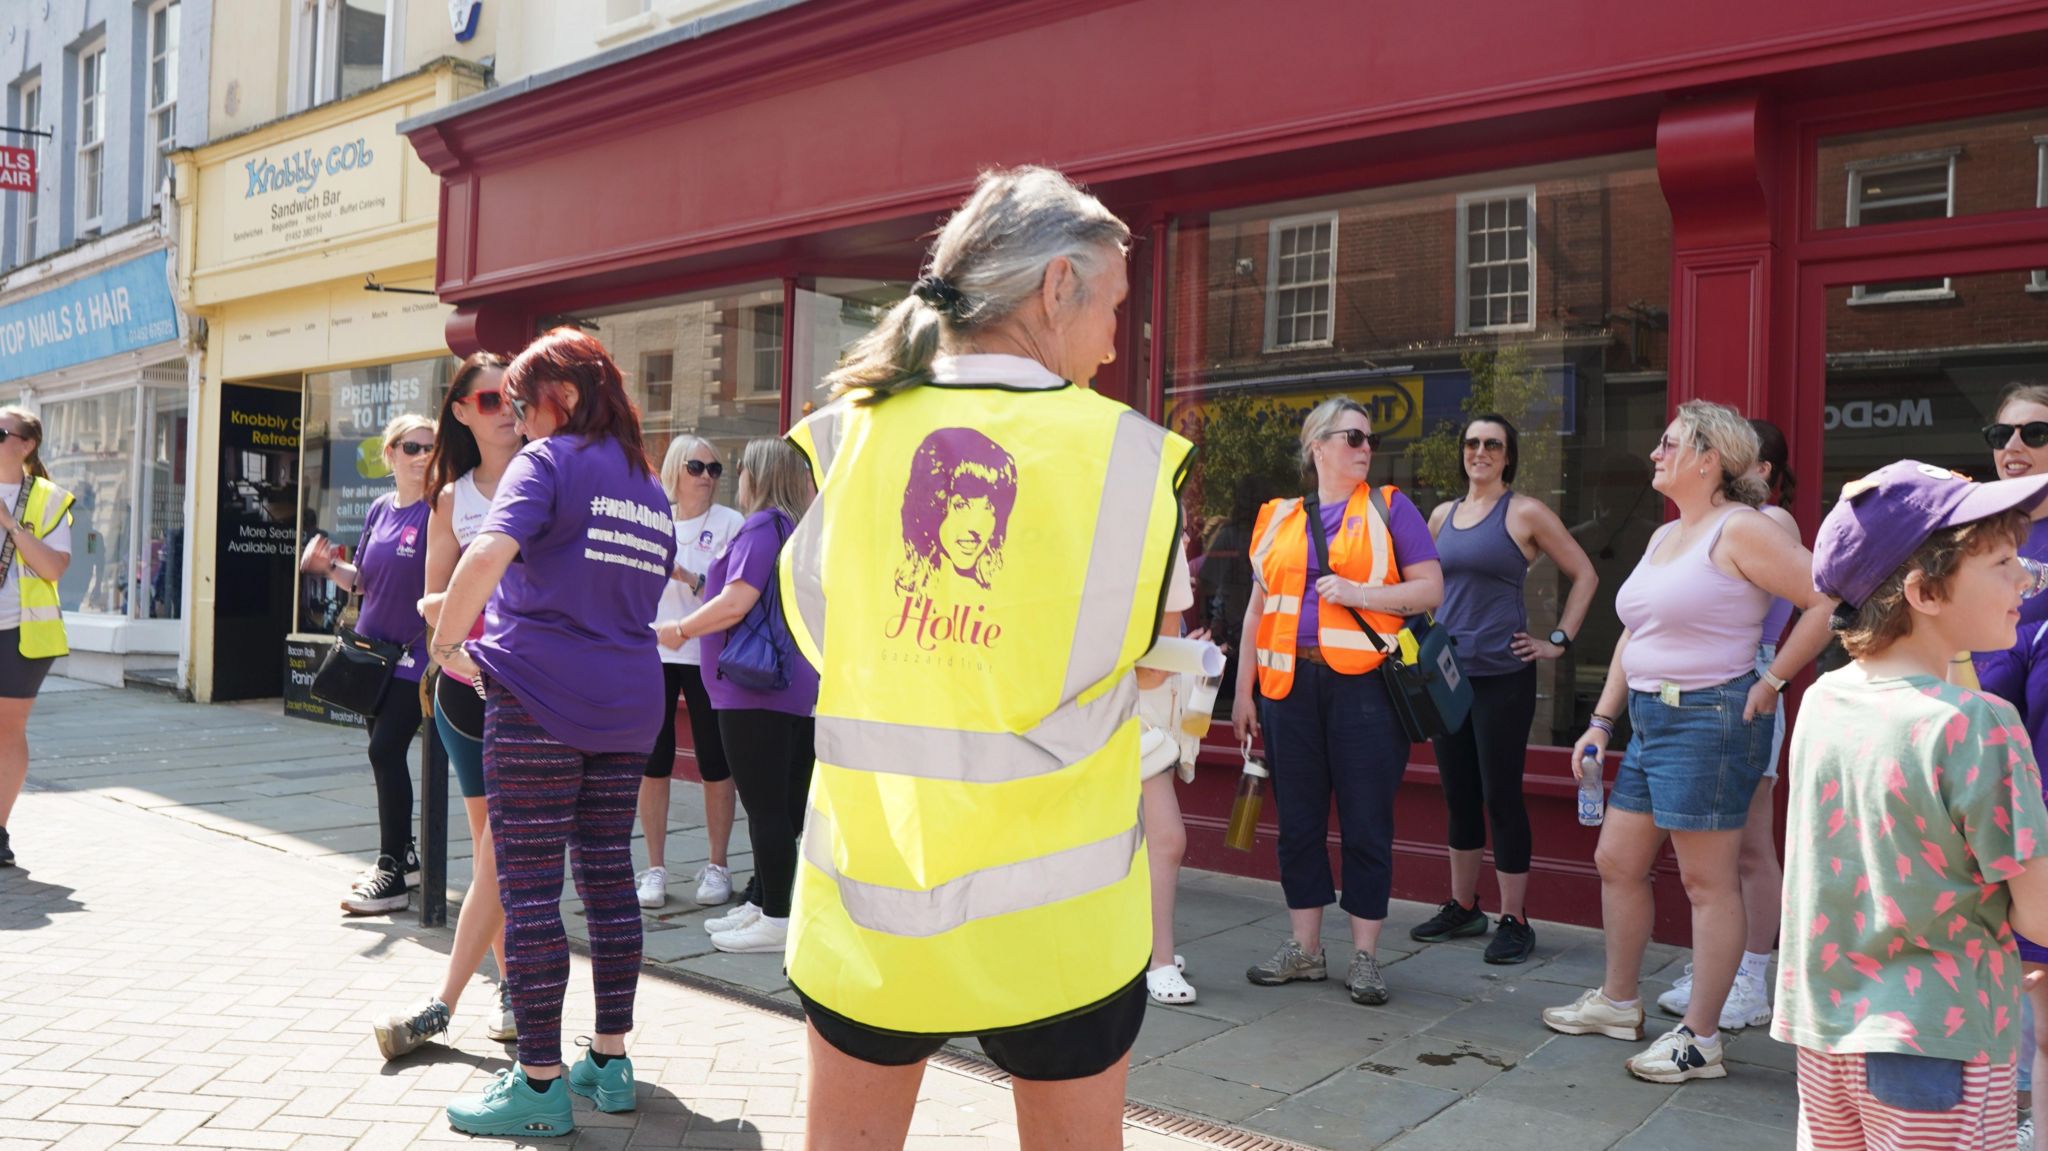 People walking through Gloucester city centre in memory of Hollie Gazzard